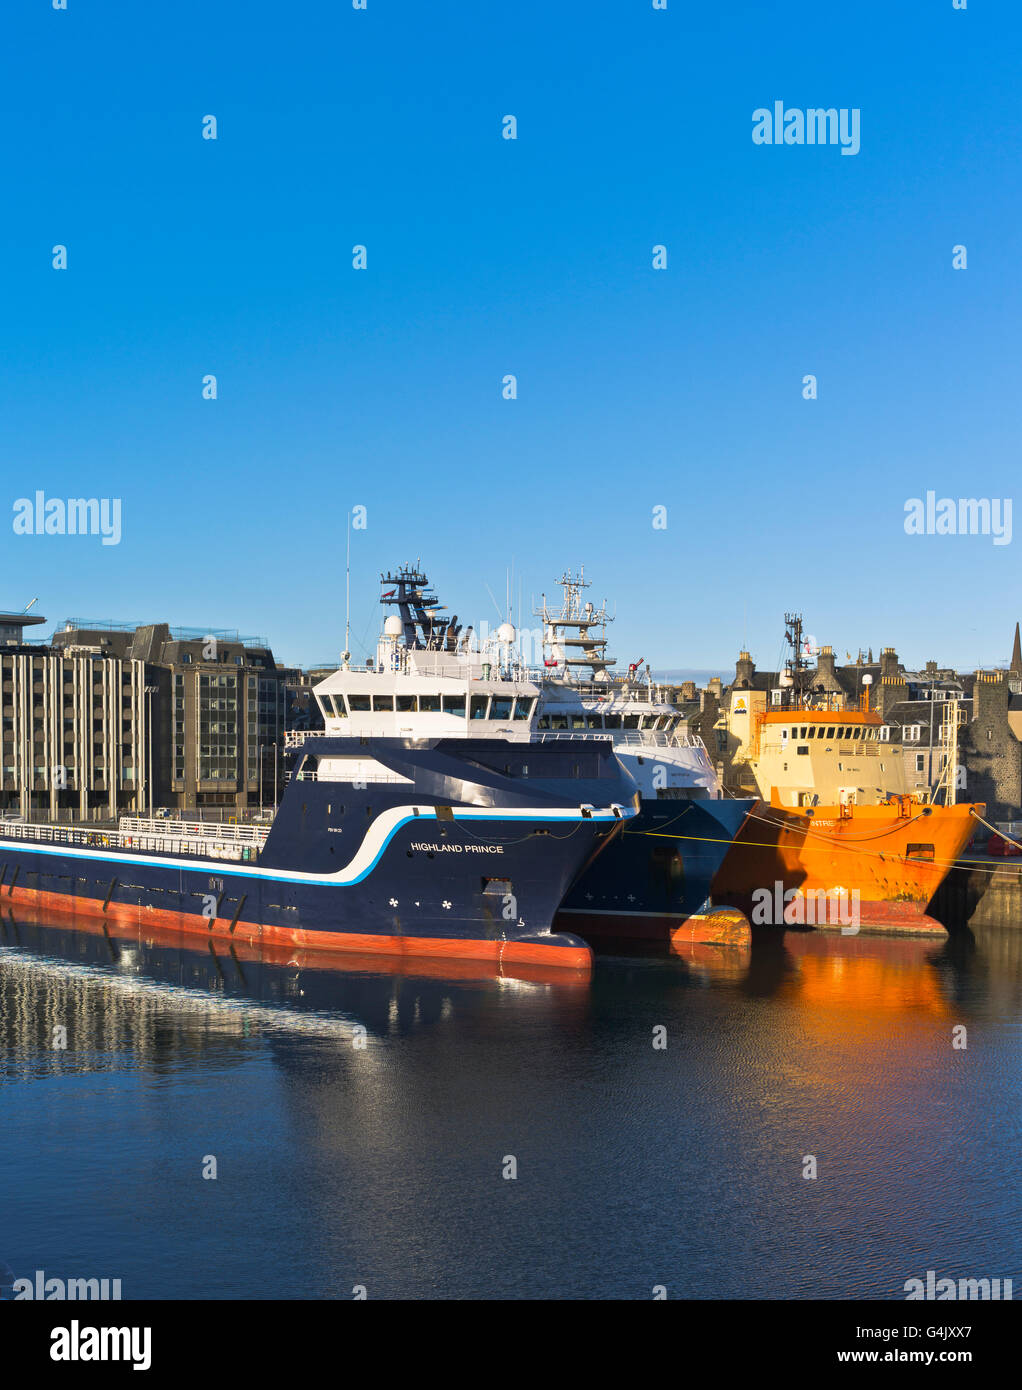 dh Aberdeen Harbour HARBOUR ABERDEEN North sea oil rig support tender ships supply vessels scotland vessel Stock Photo